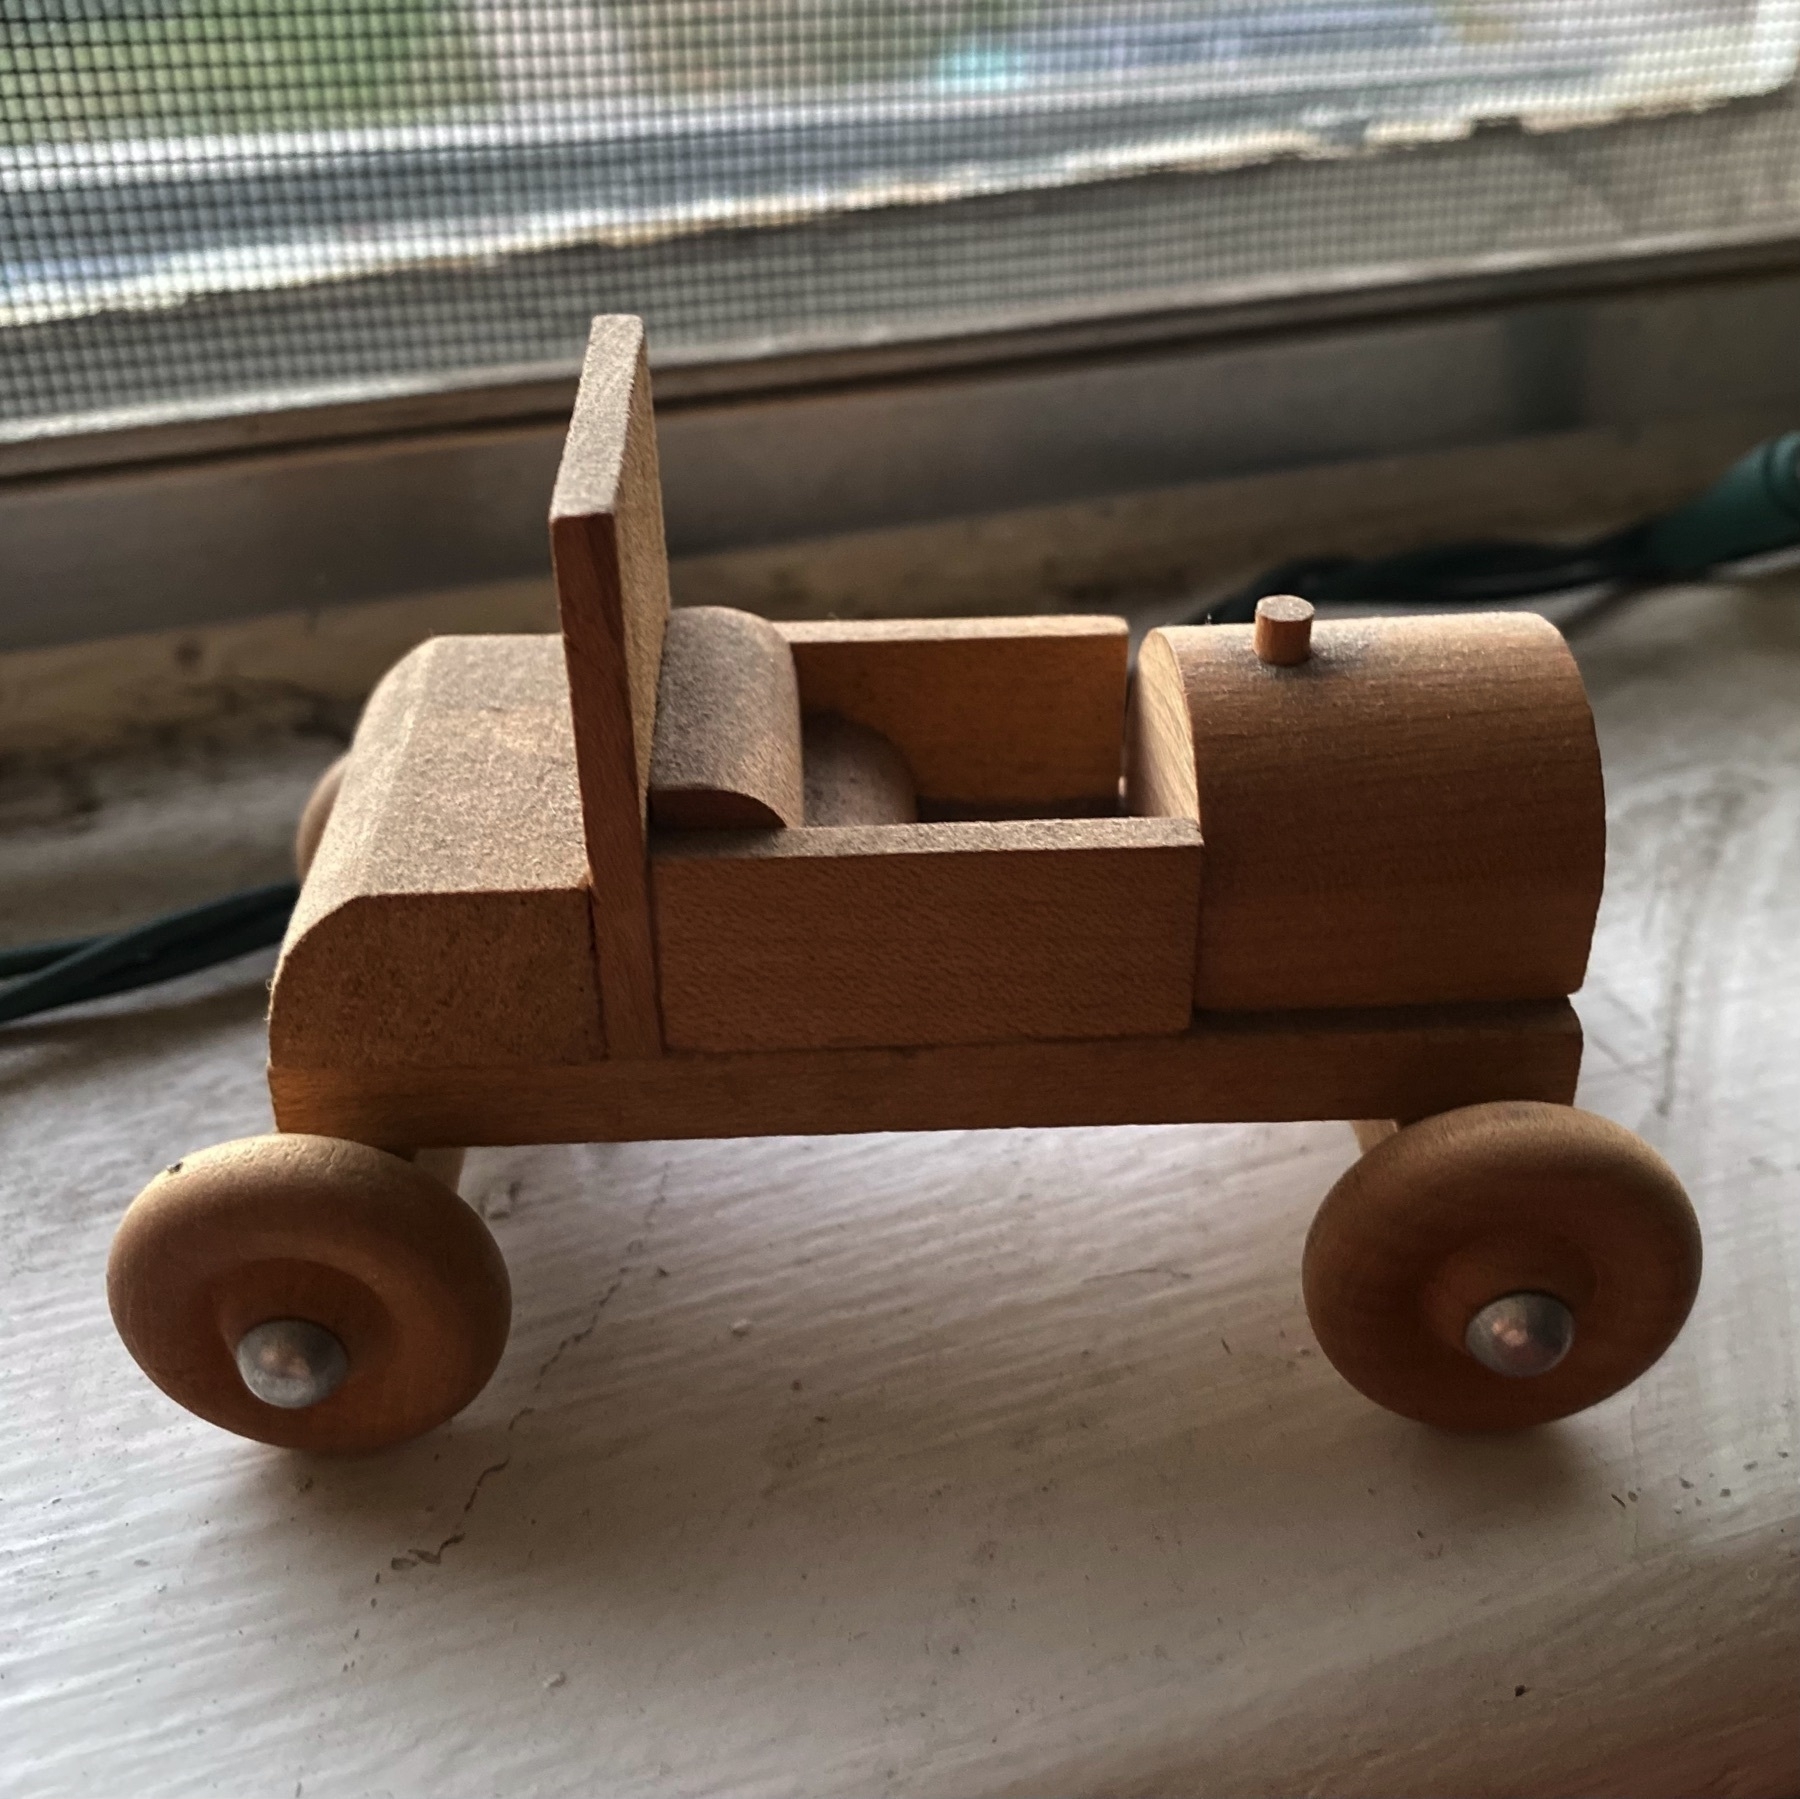 A small wood toy car, assembled from a kit and glued together.